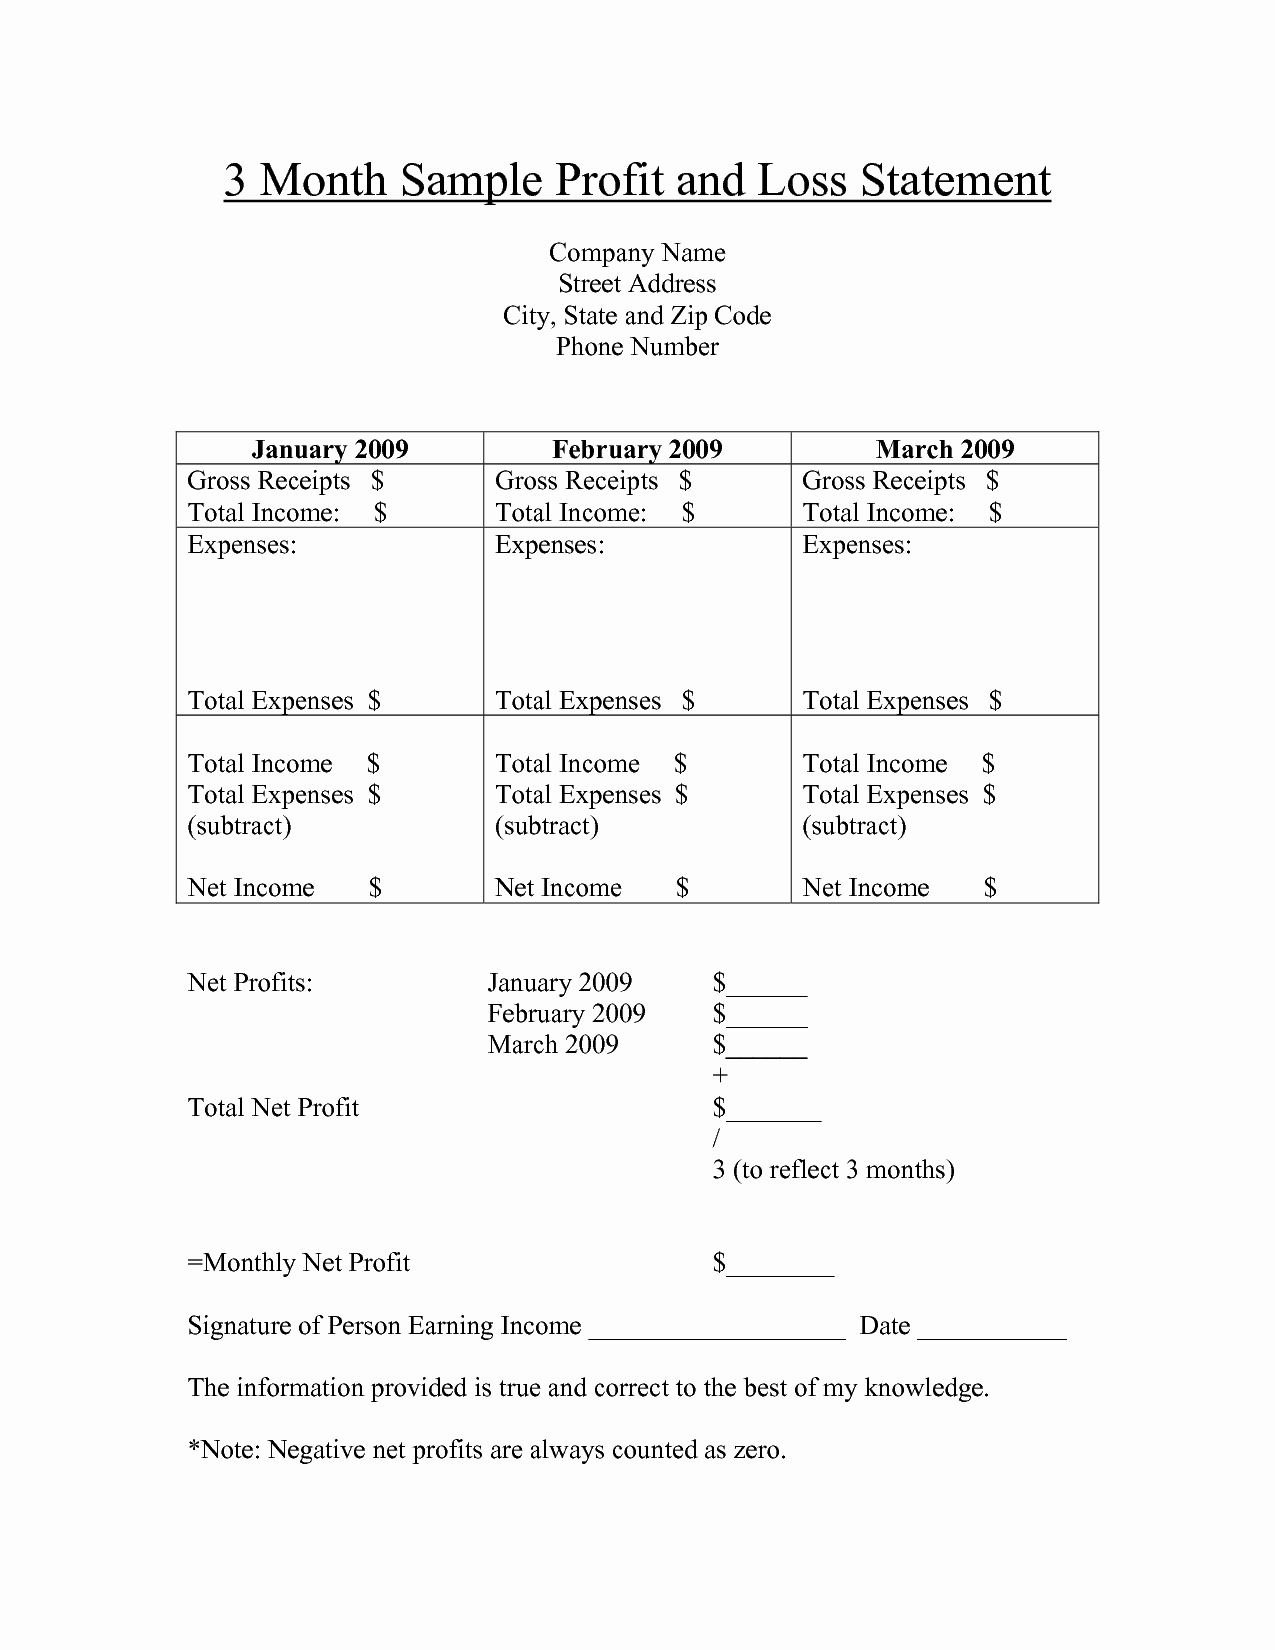 Sample Profit Loss Statement Template Beautiful Free Printable Profit and Loss Statement form for Home